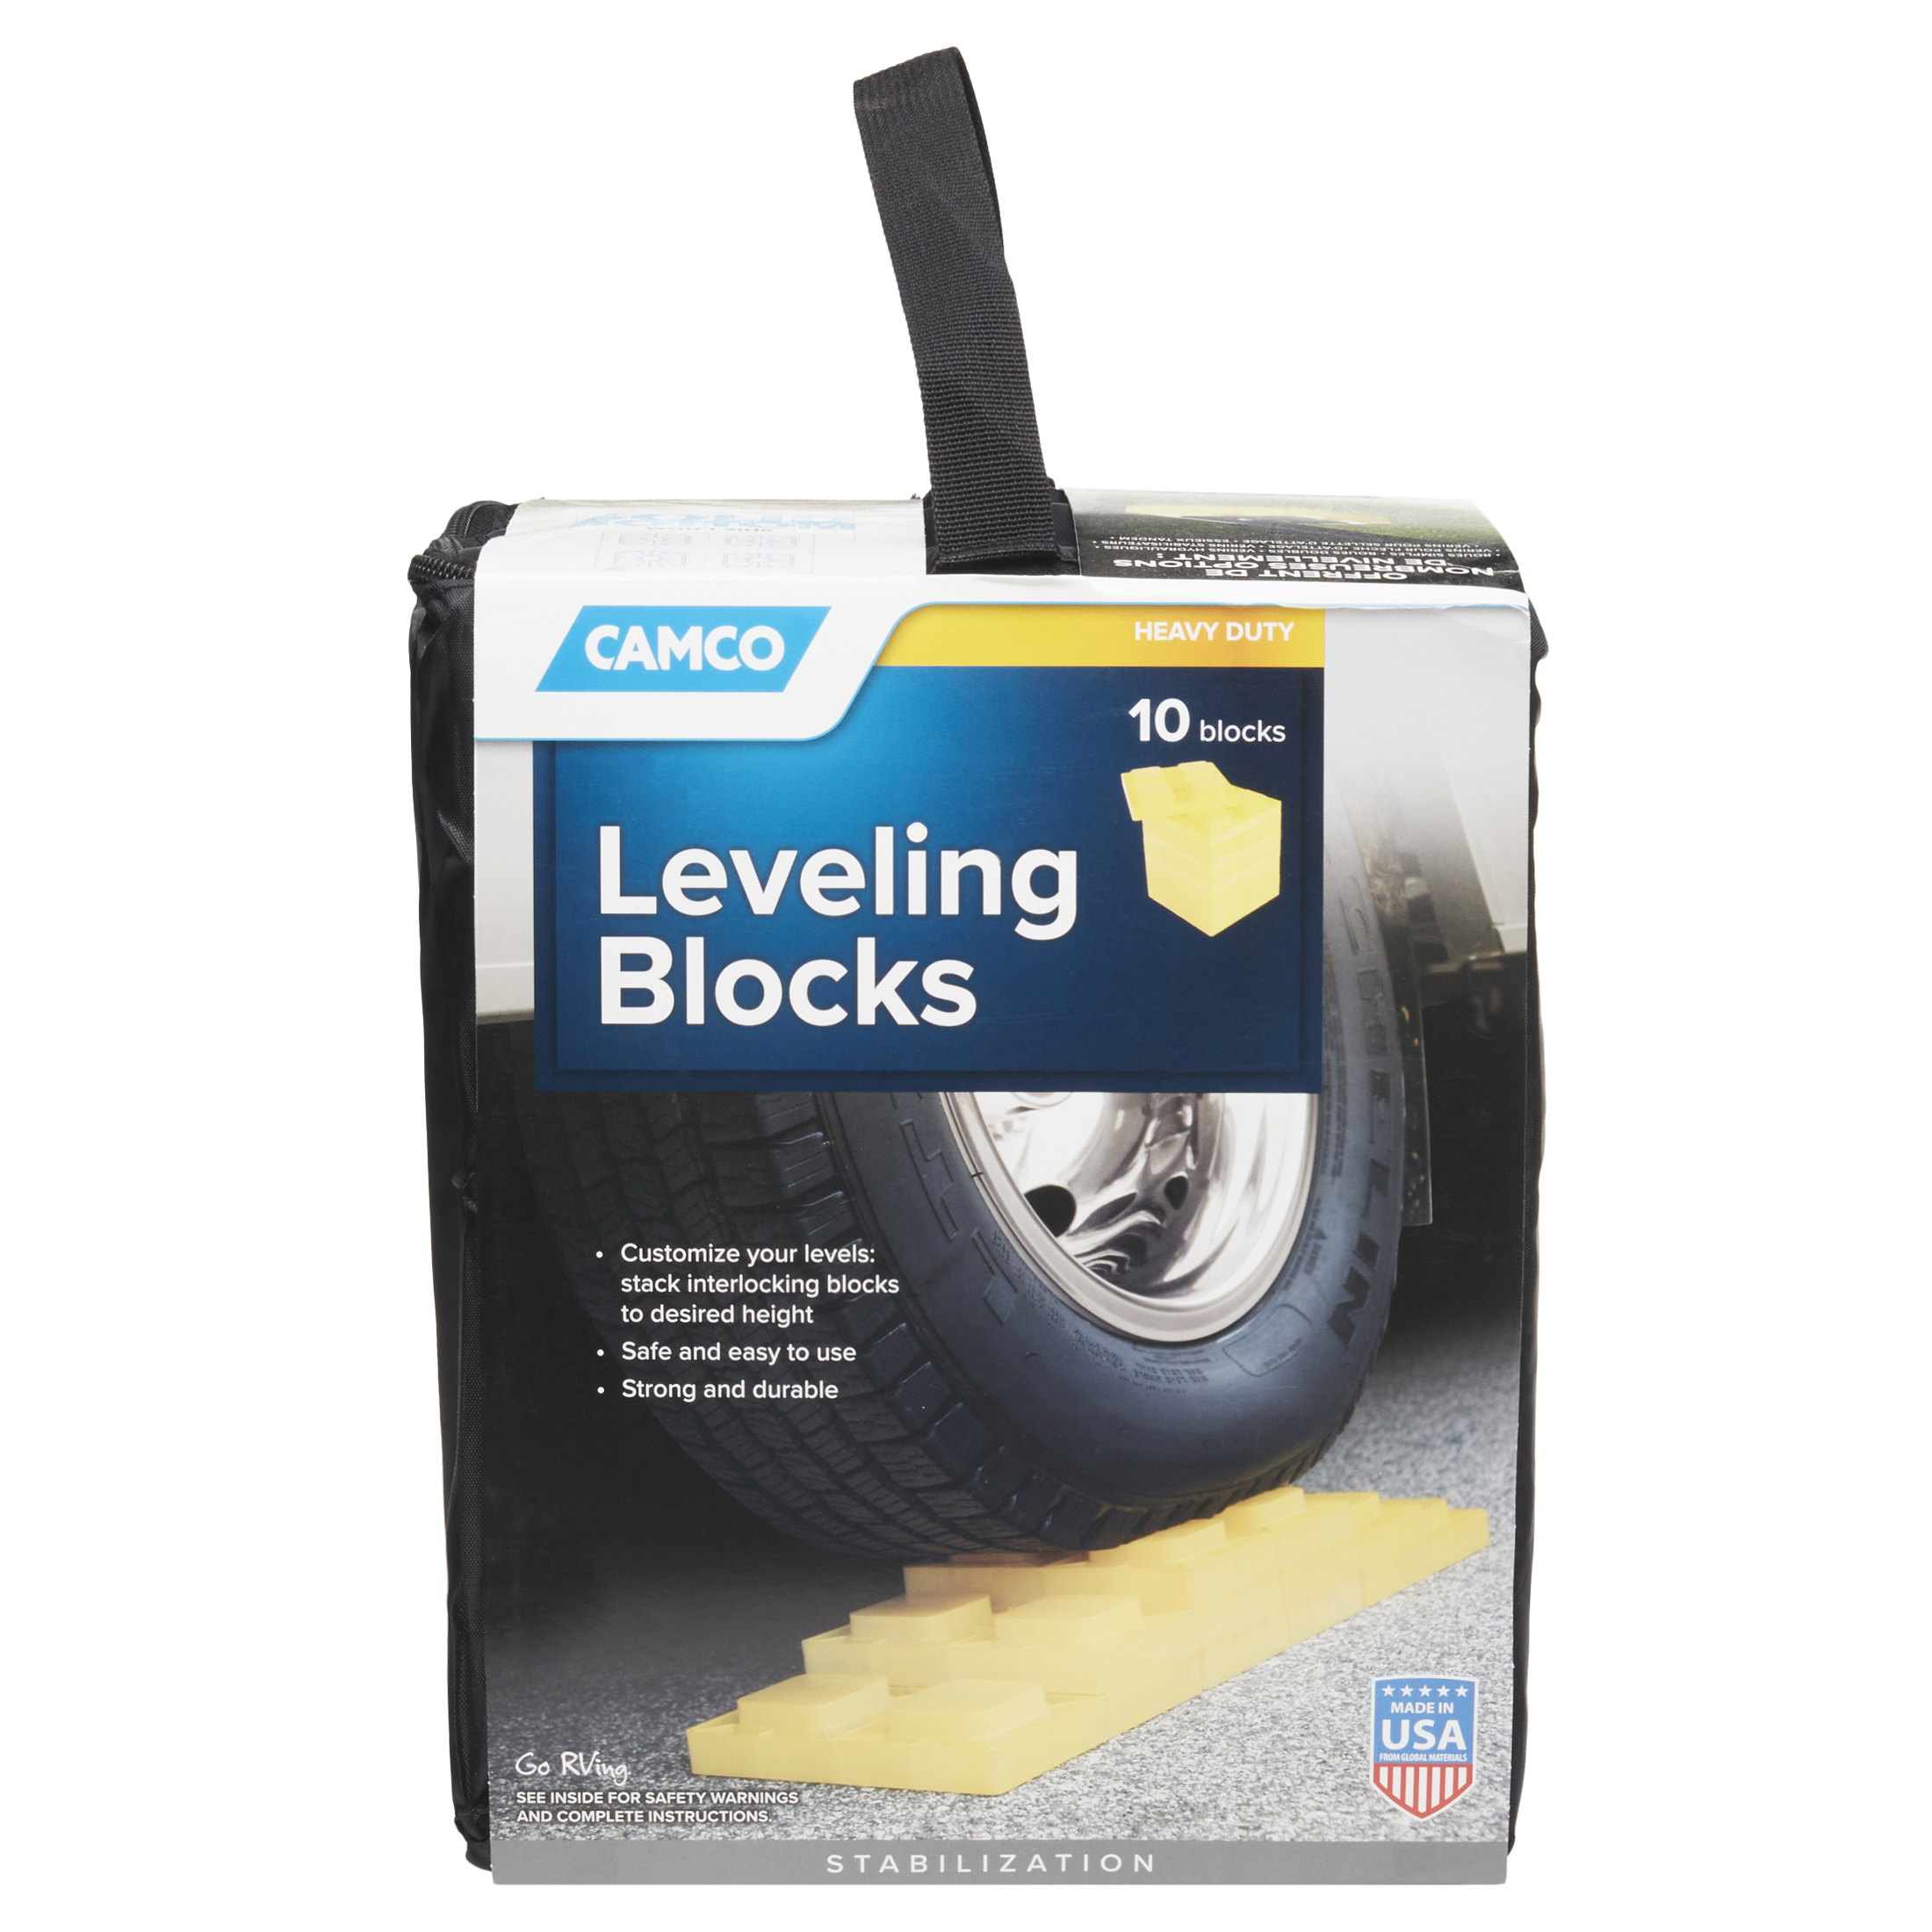 Camco Heavy Duty Leveling Blocks | 10 Pack | Yellow Resin Plastic (44505) - image 1 of 5